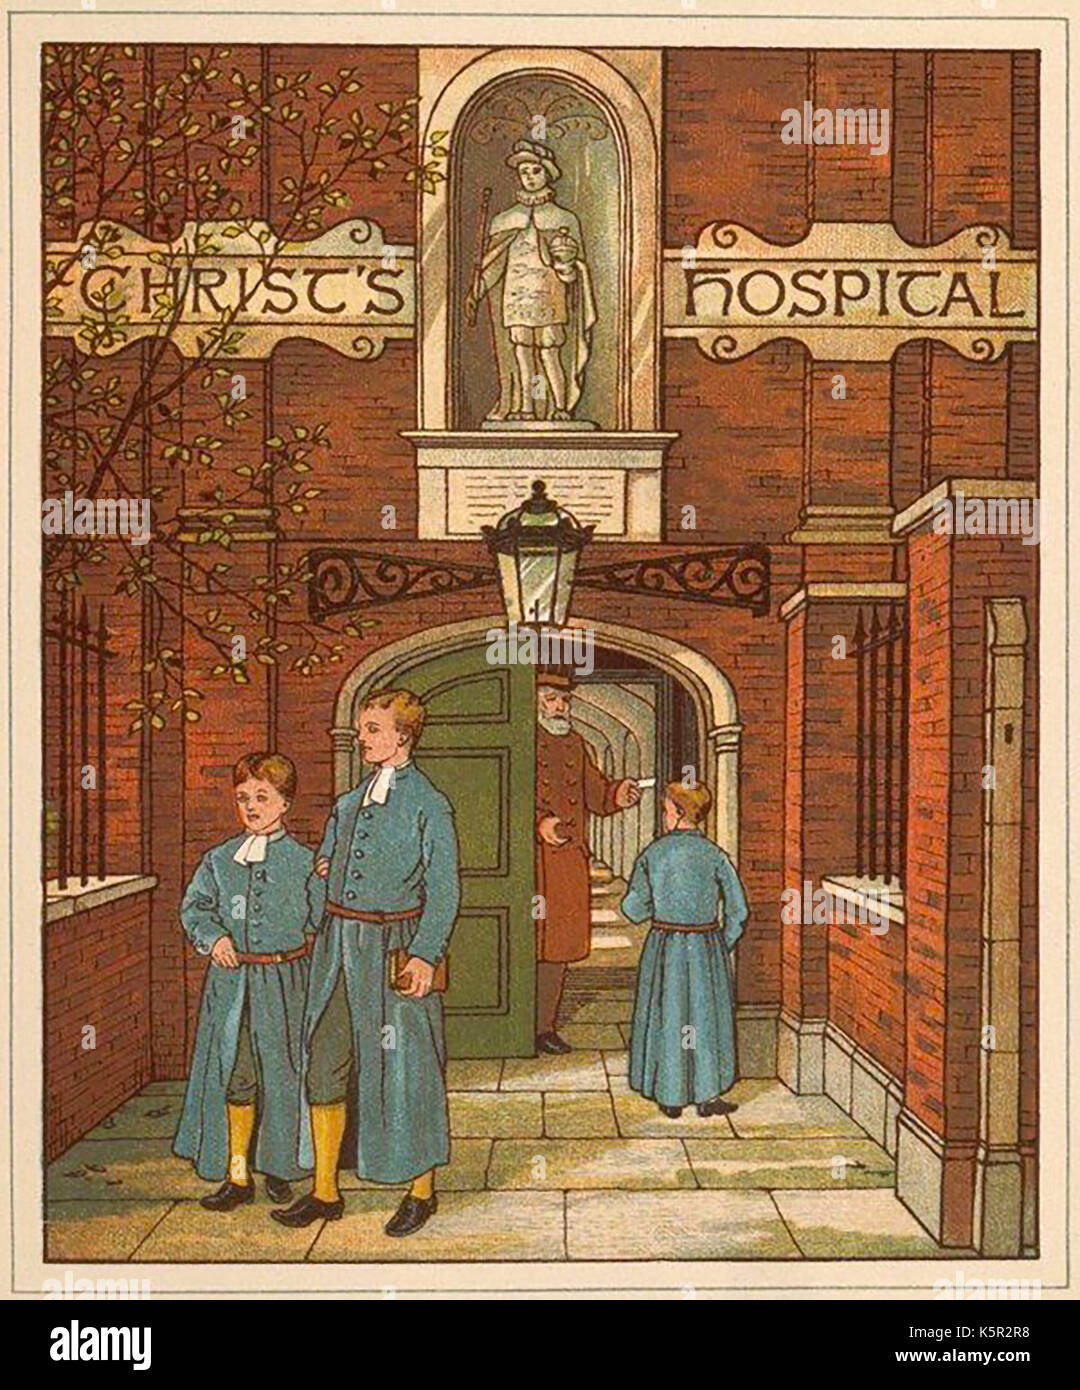 A colour illustration from a Victorian children's book showing the entrance to the Blue Coat School (Christ's Hospital), Newgate Street, London, a doorman and boys dressed in uniform. Stock Photo